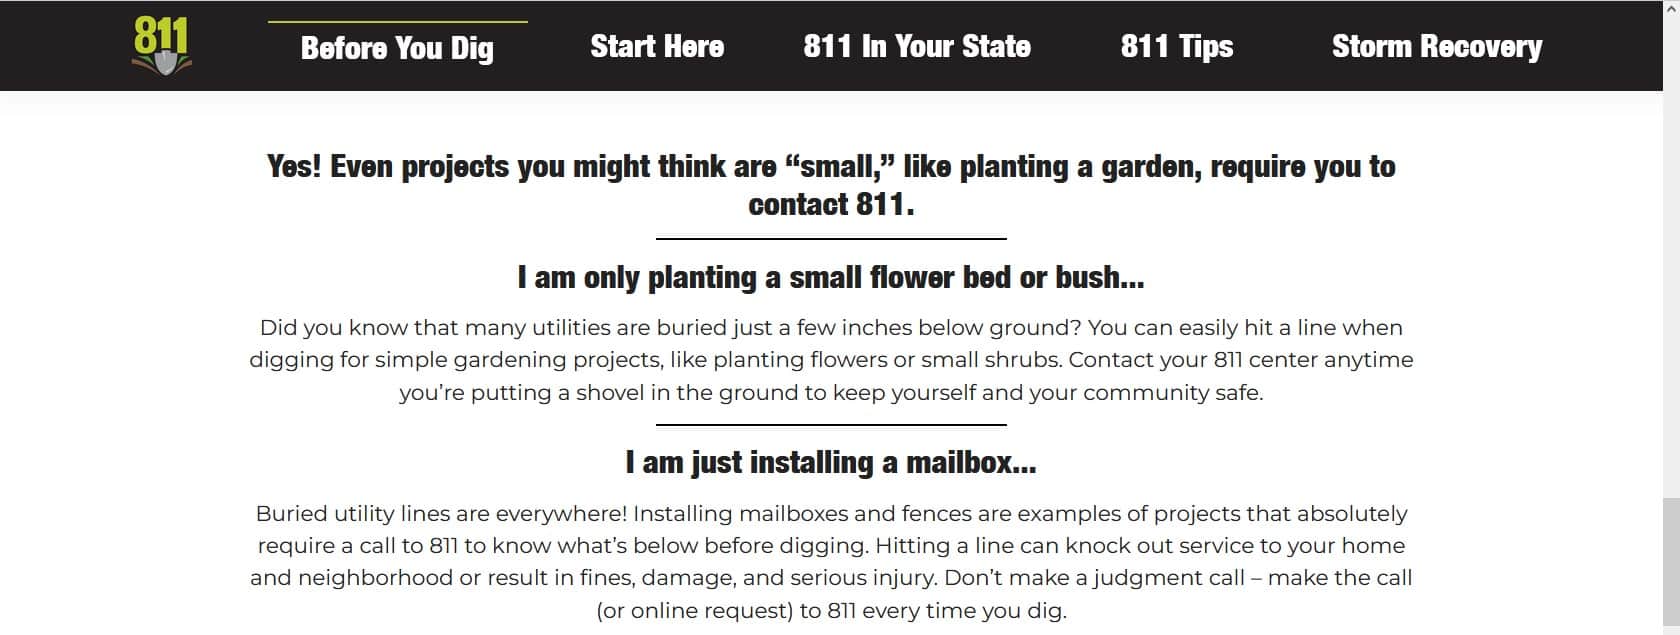 How Deep Can I Dig Before Calling 811